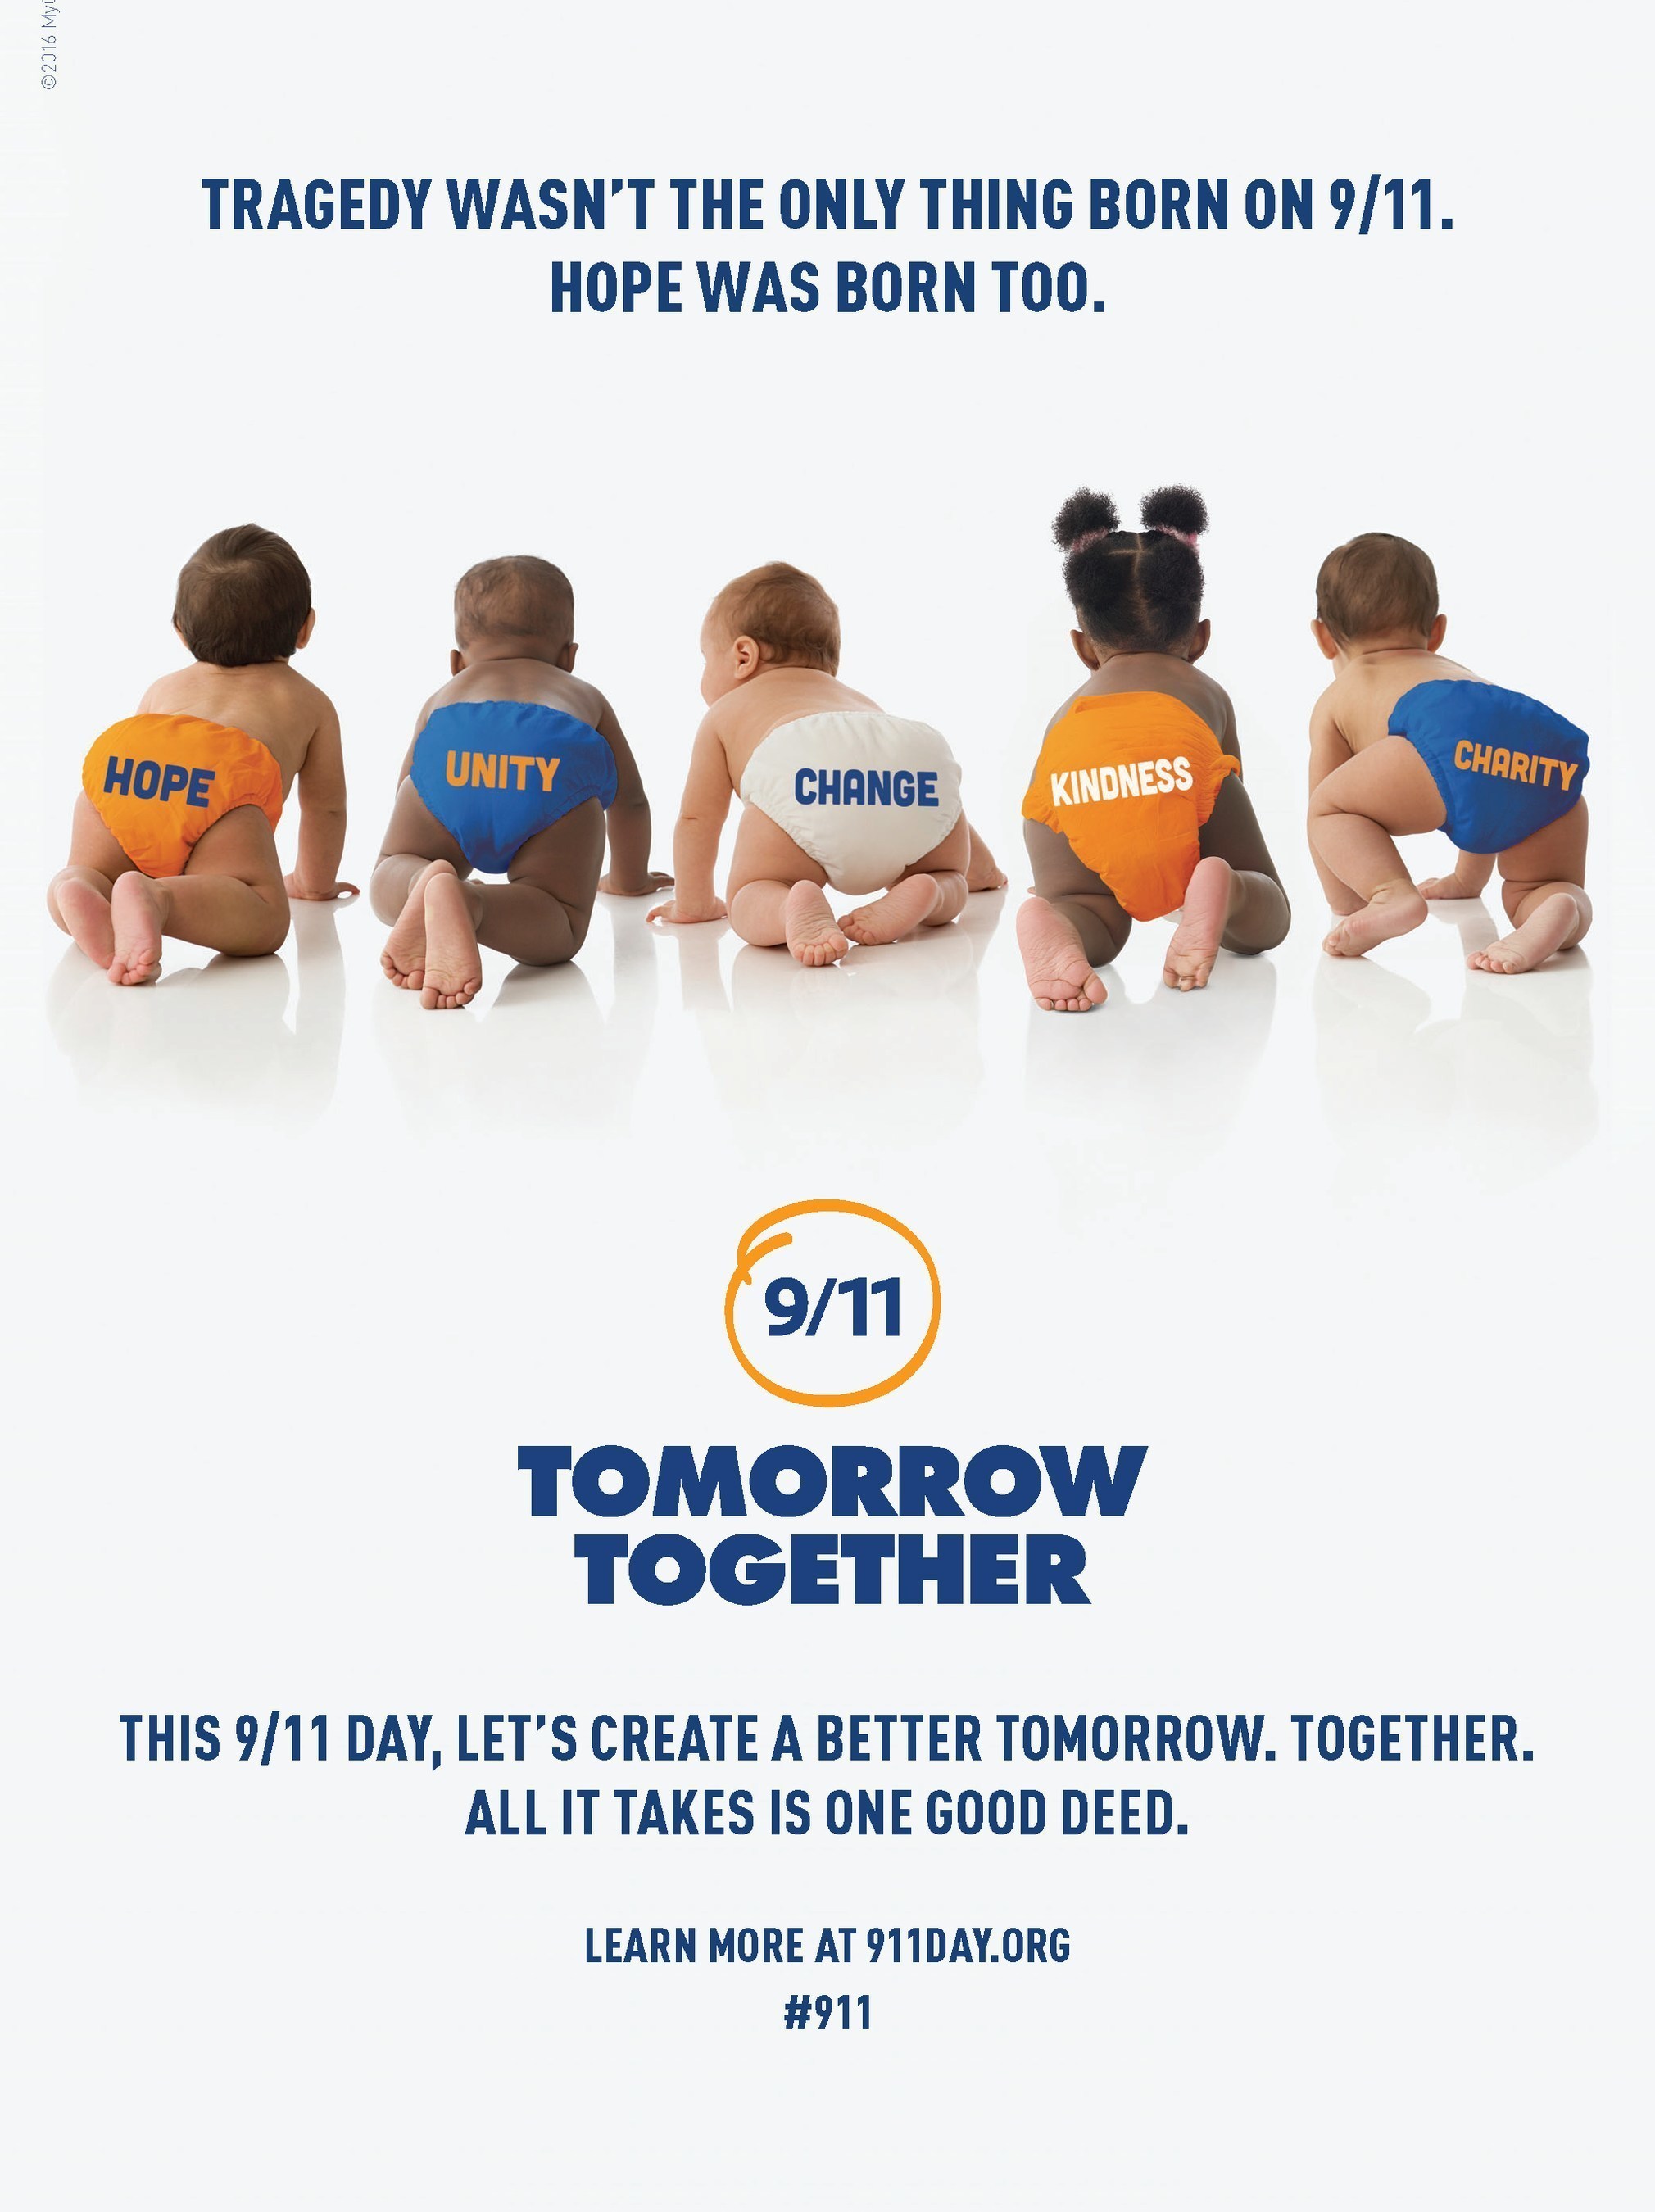 New PSA campaign promotes unity for 15th Anniversary of 9/11.